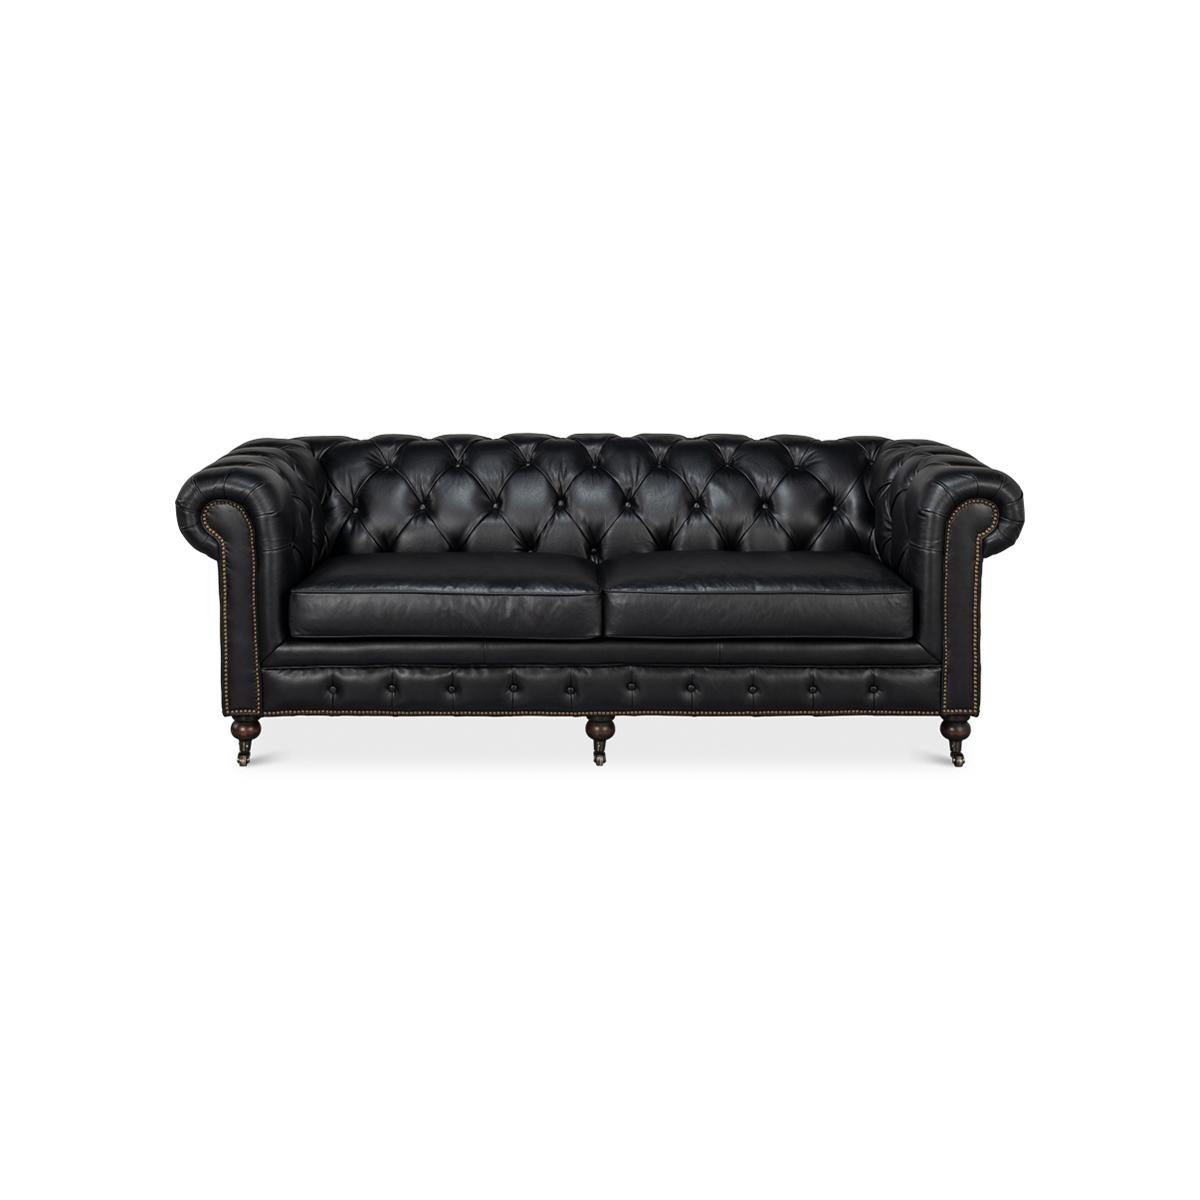 A vintage style classic English Chesterfield leather upholstered sofa, with top-grain leather. With a tufted backrest and rollover arms, and two padded cushions raised on turned mahogany feet with brass casters and finished with brass nailhead